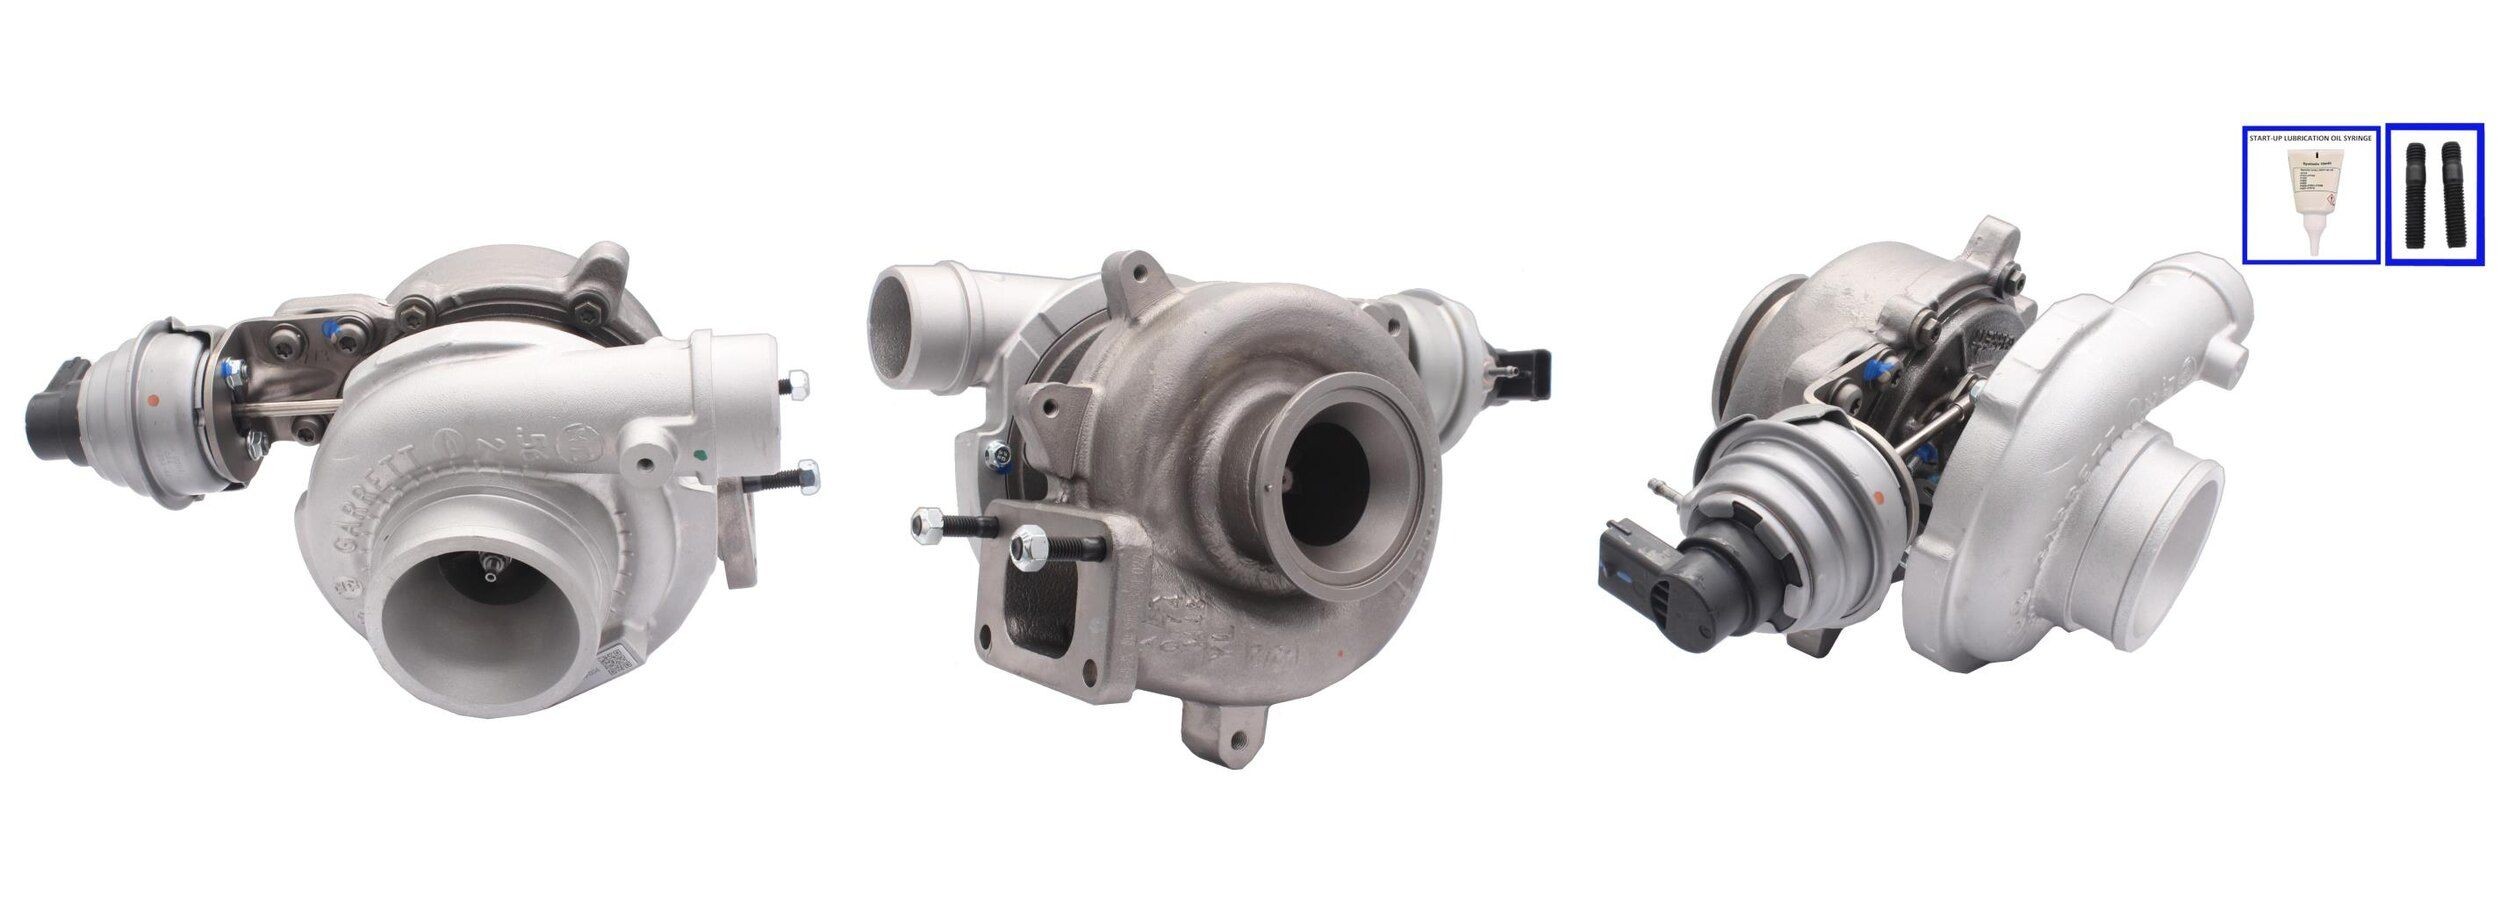 ELSTOCK Exhaust Turbocharger, with linear position sensor (LPS), without gaskets/seals Turbo 91-2068 buy